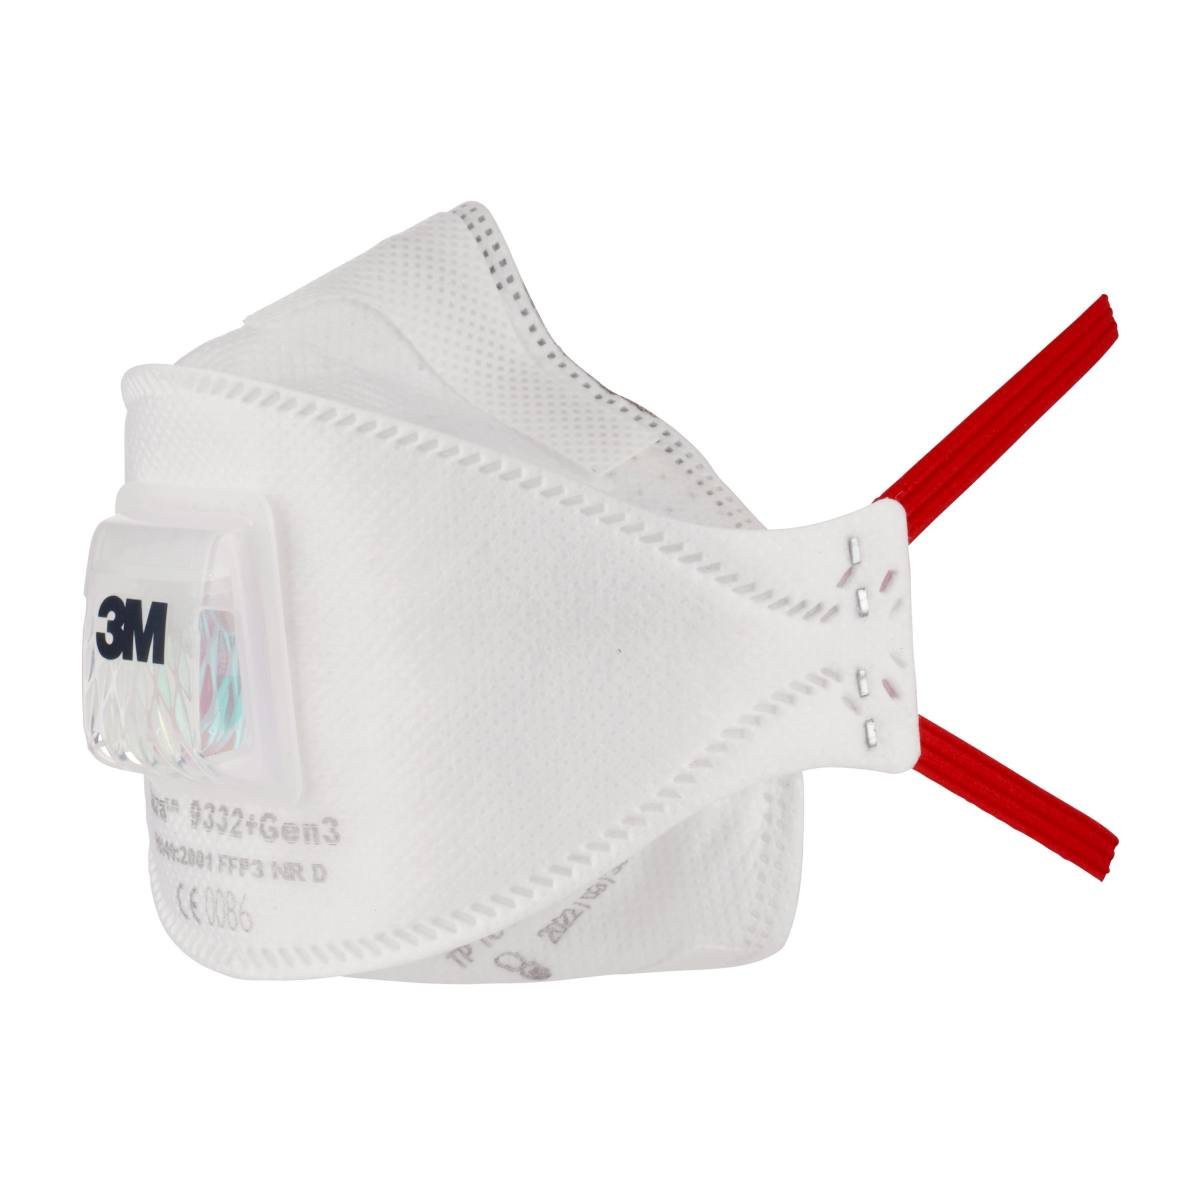 3M 9332 Gen3 Aura respirator FFP3 with cool-flow exhalation valve, up to 30 times the limit value (hygienically individually packaged)